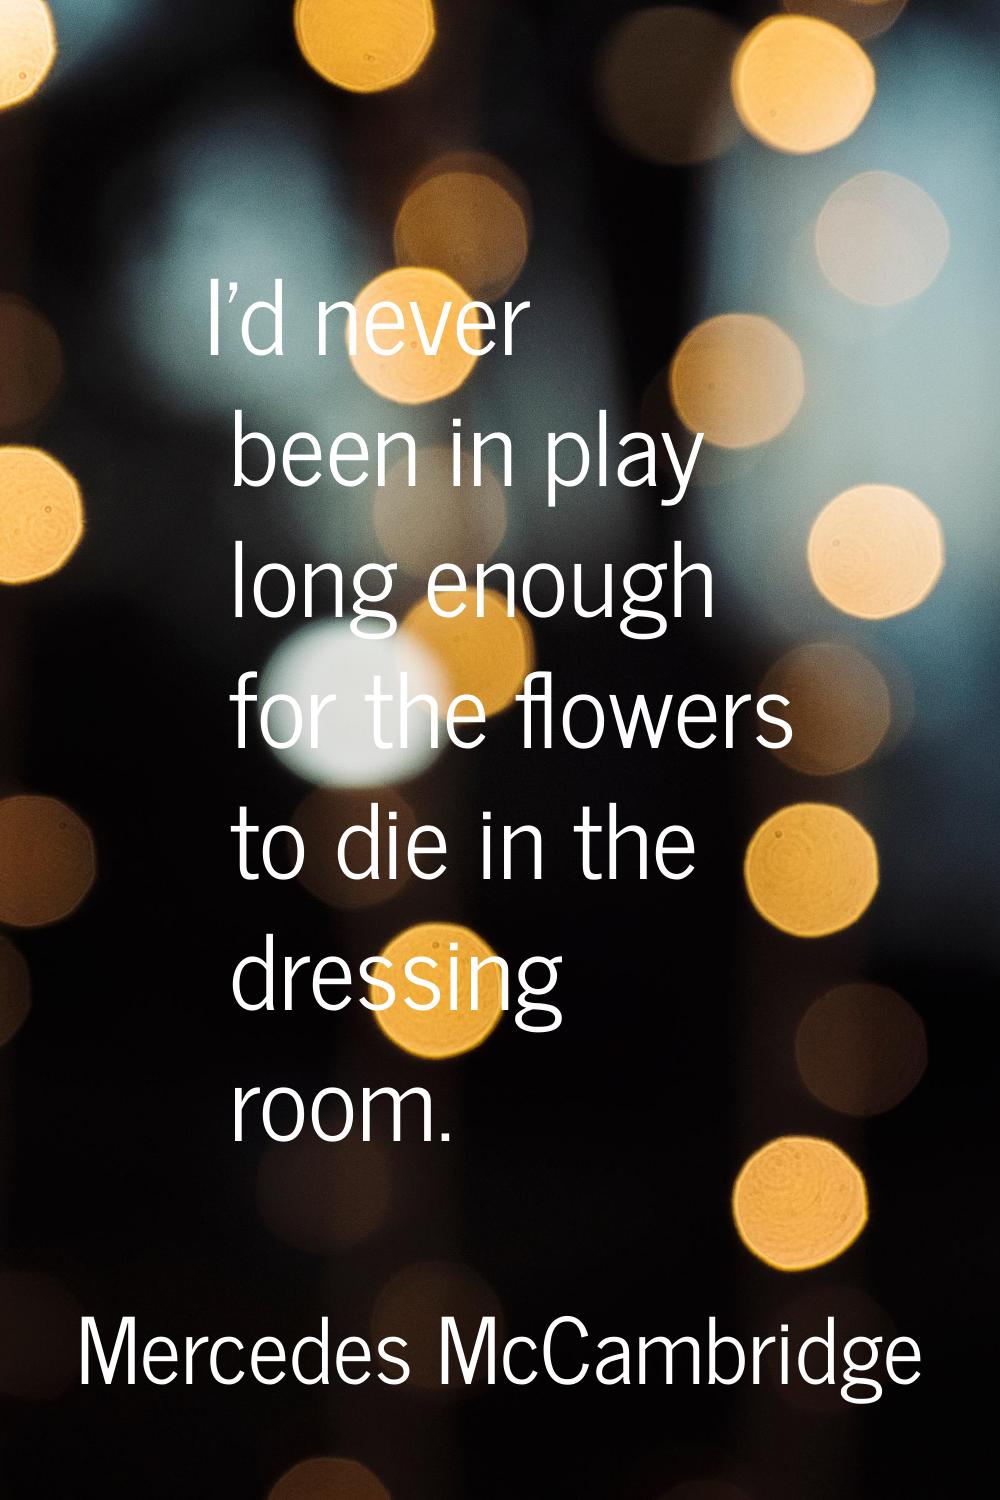 I'd never been in play long enough for the flowers to die in the dressing room.